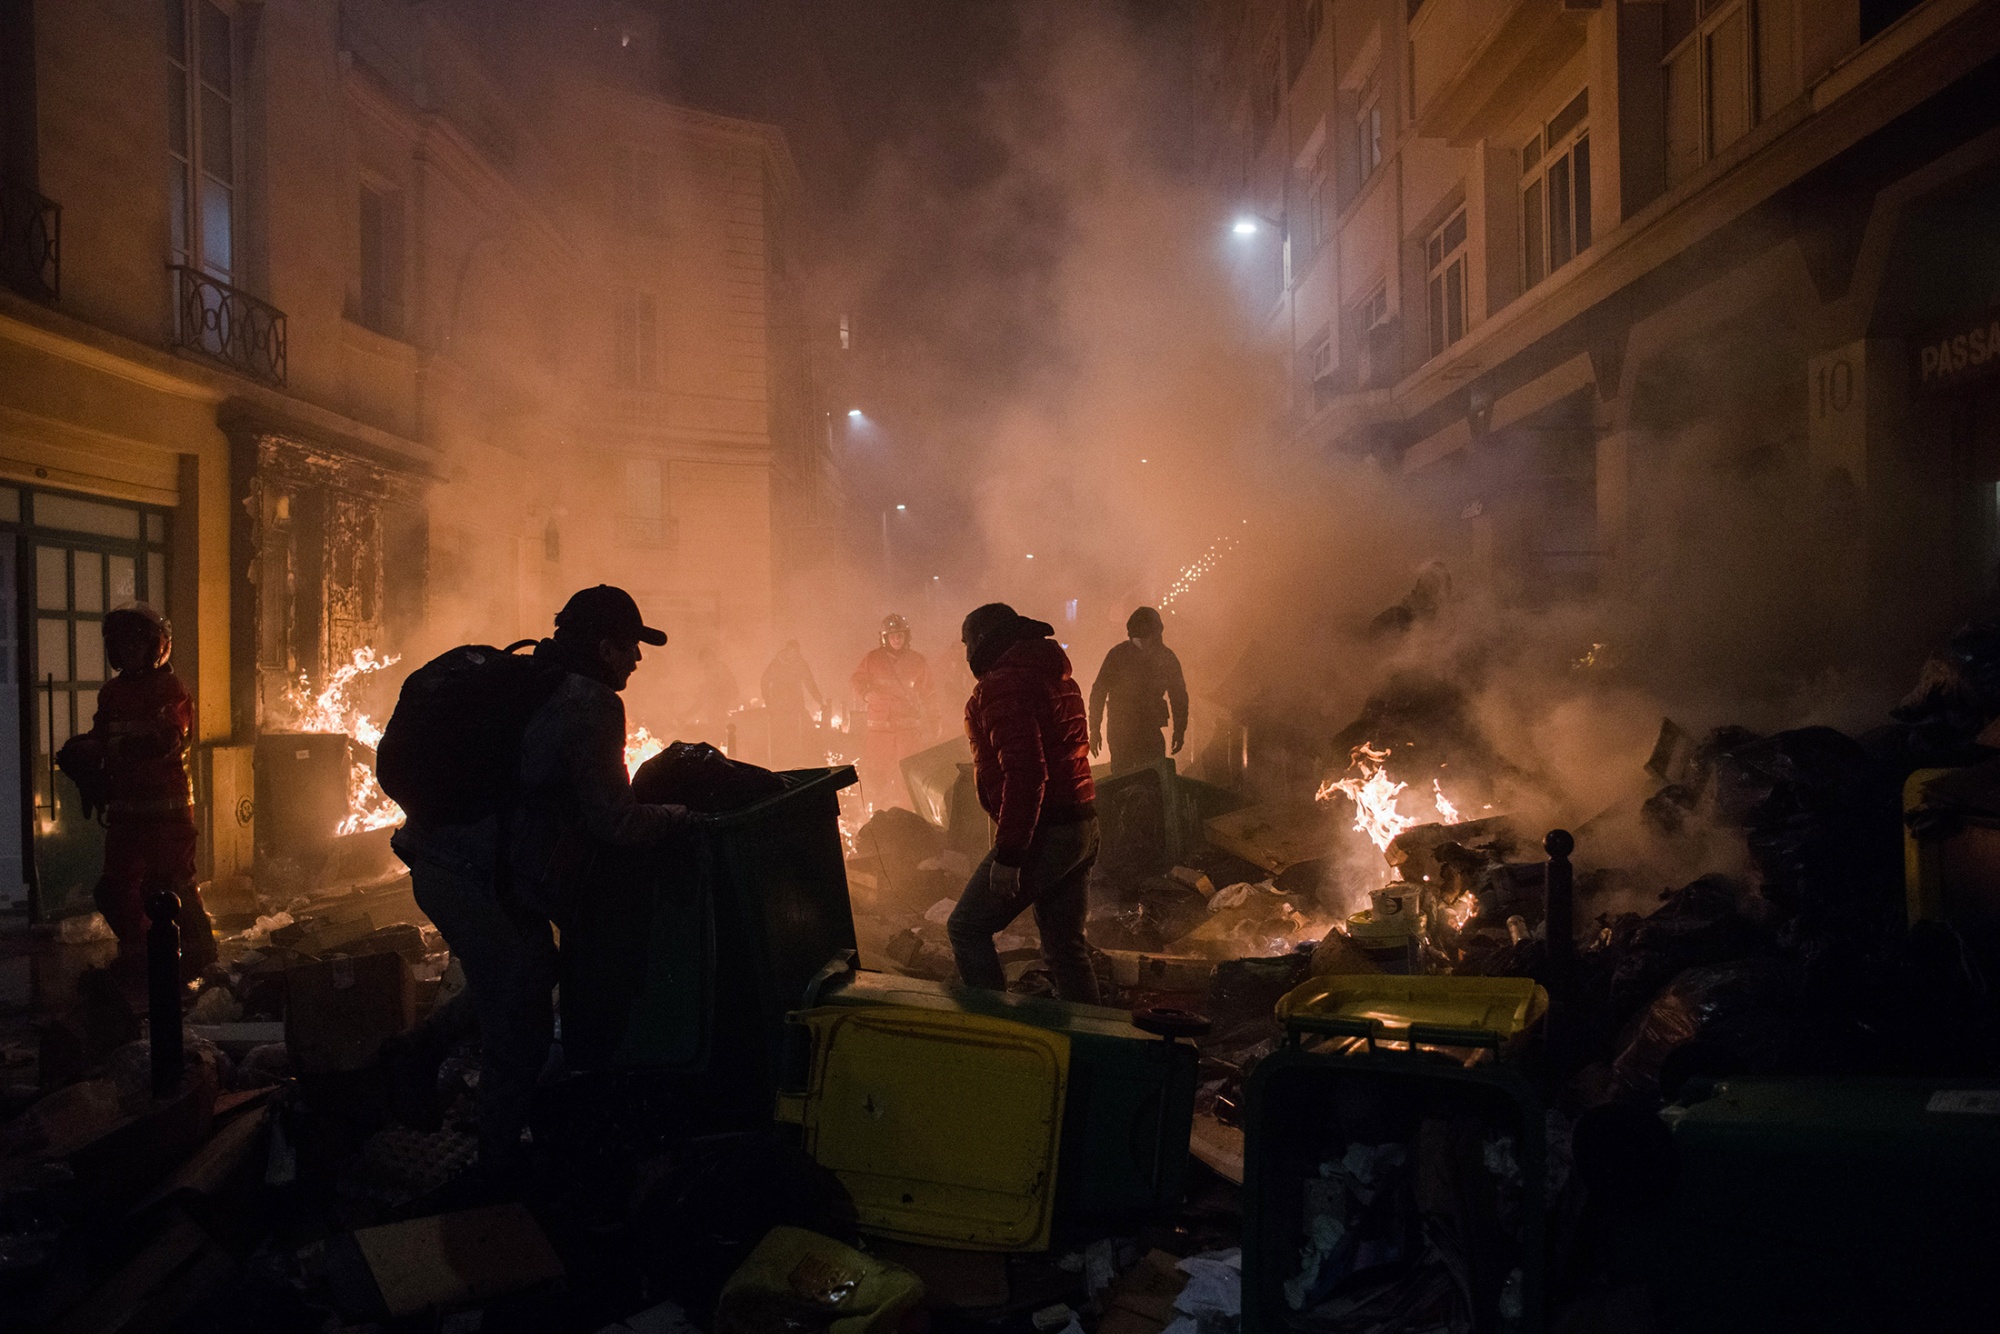 Residents and firefighters try to extinguish a street fire on Thursday during protests in central Paris over Emmanuel Macron’s pension reform plan.